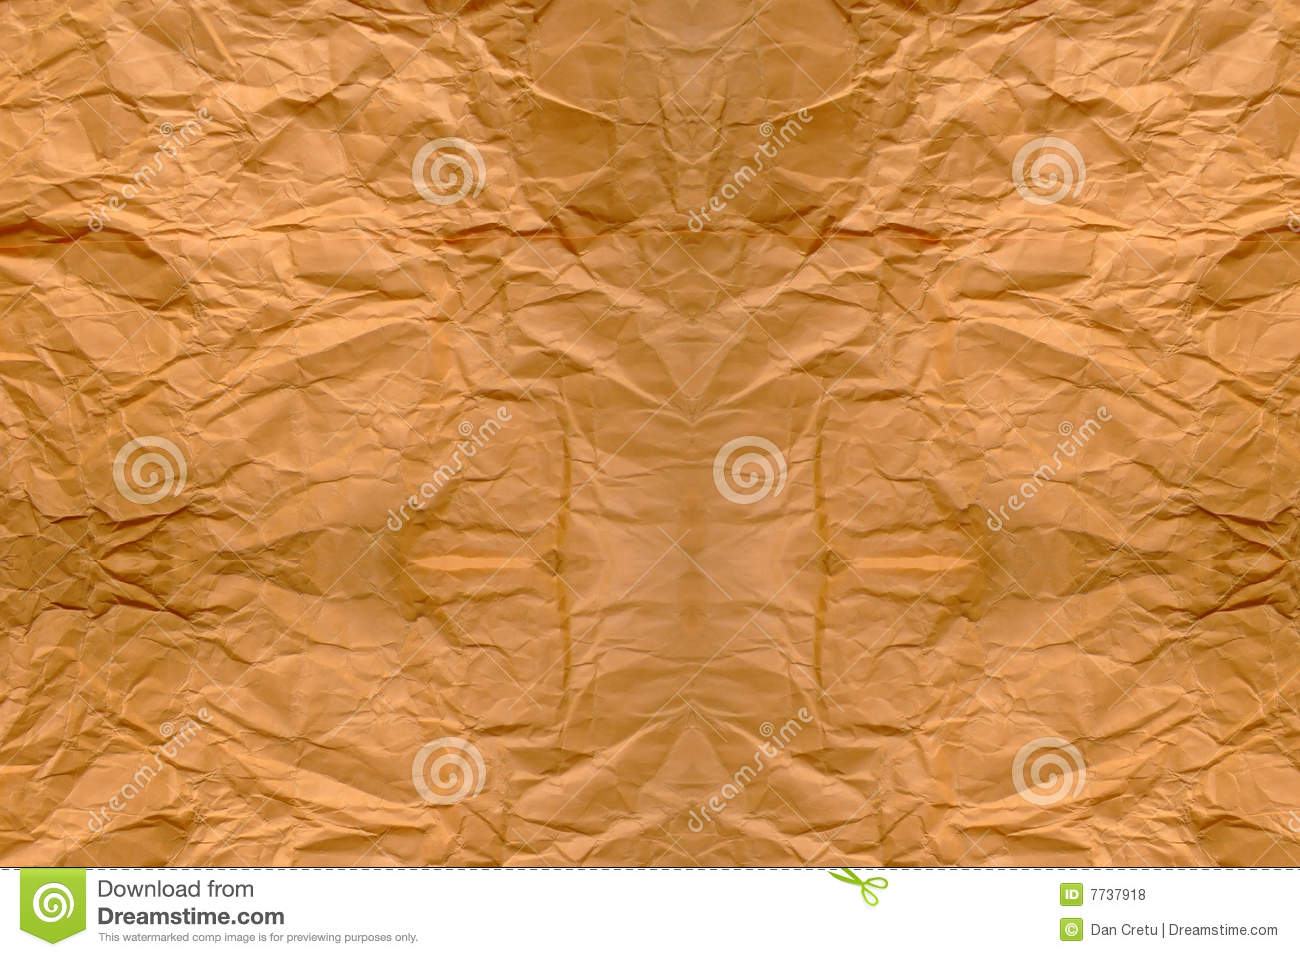 Brown Paper Bag Background Royalty Free Stock Photos   Image  7737918